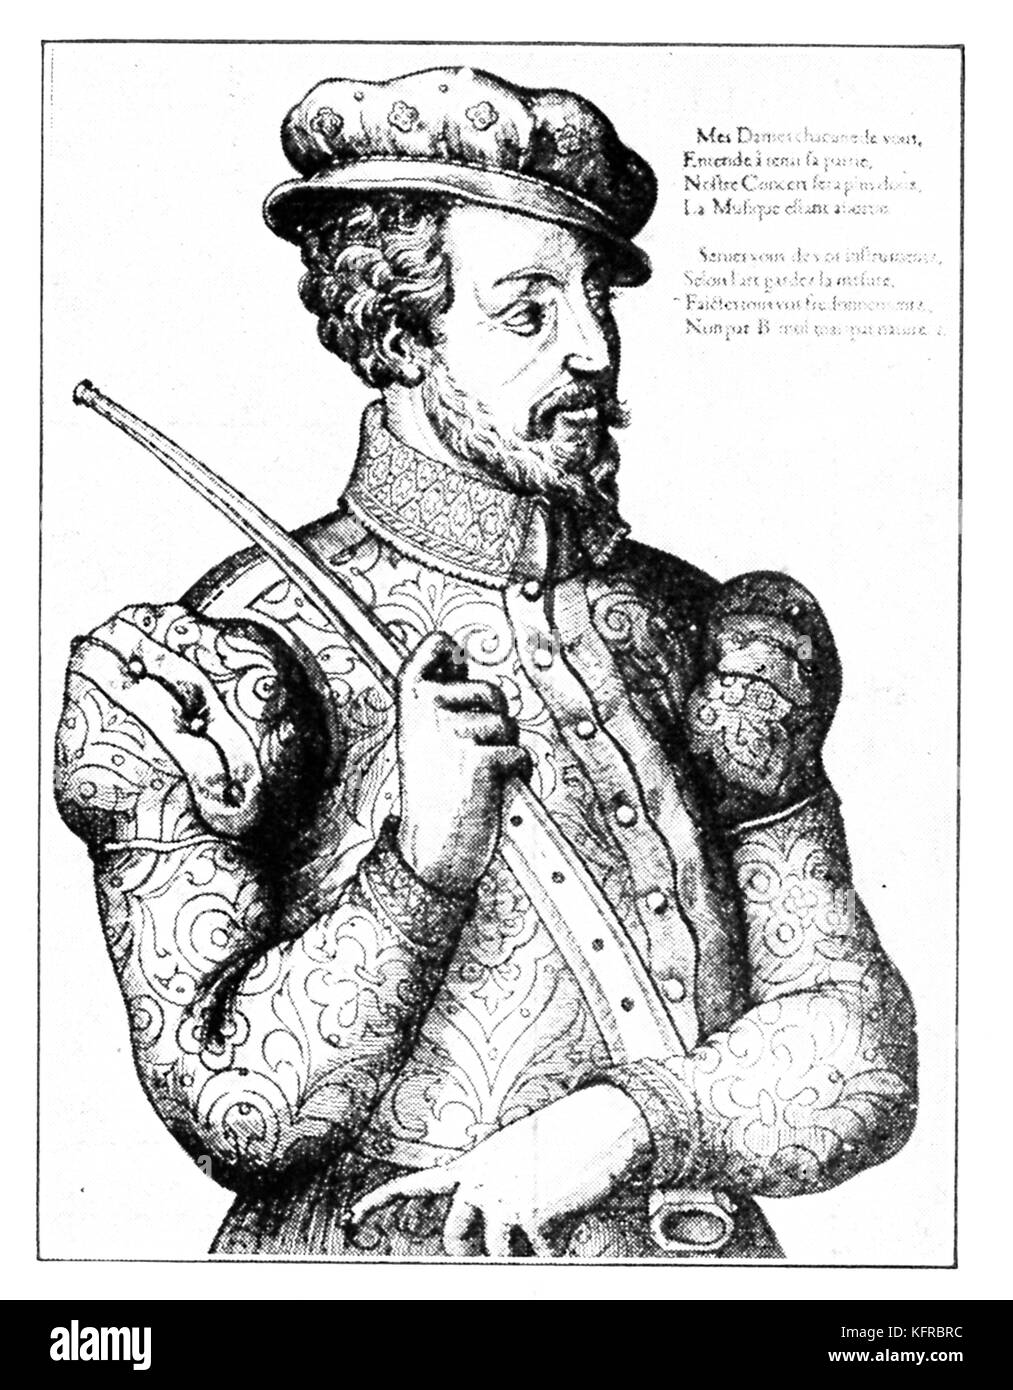 'The Consert' - unsigned series of French woodcuts, c. 1570.  Gentleman holding a curved Zinke (Cornet à bouquin). Stock Photo